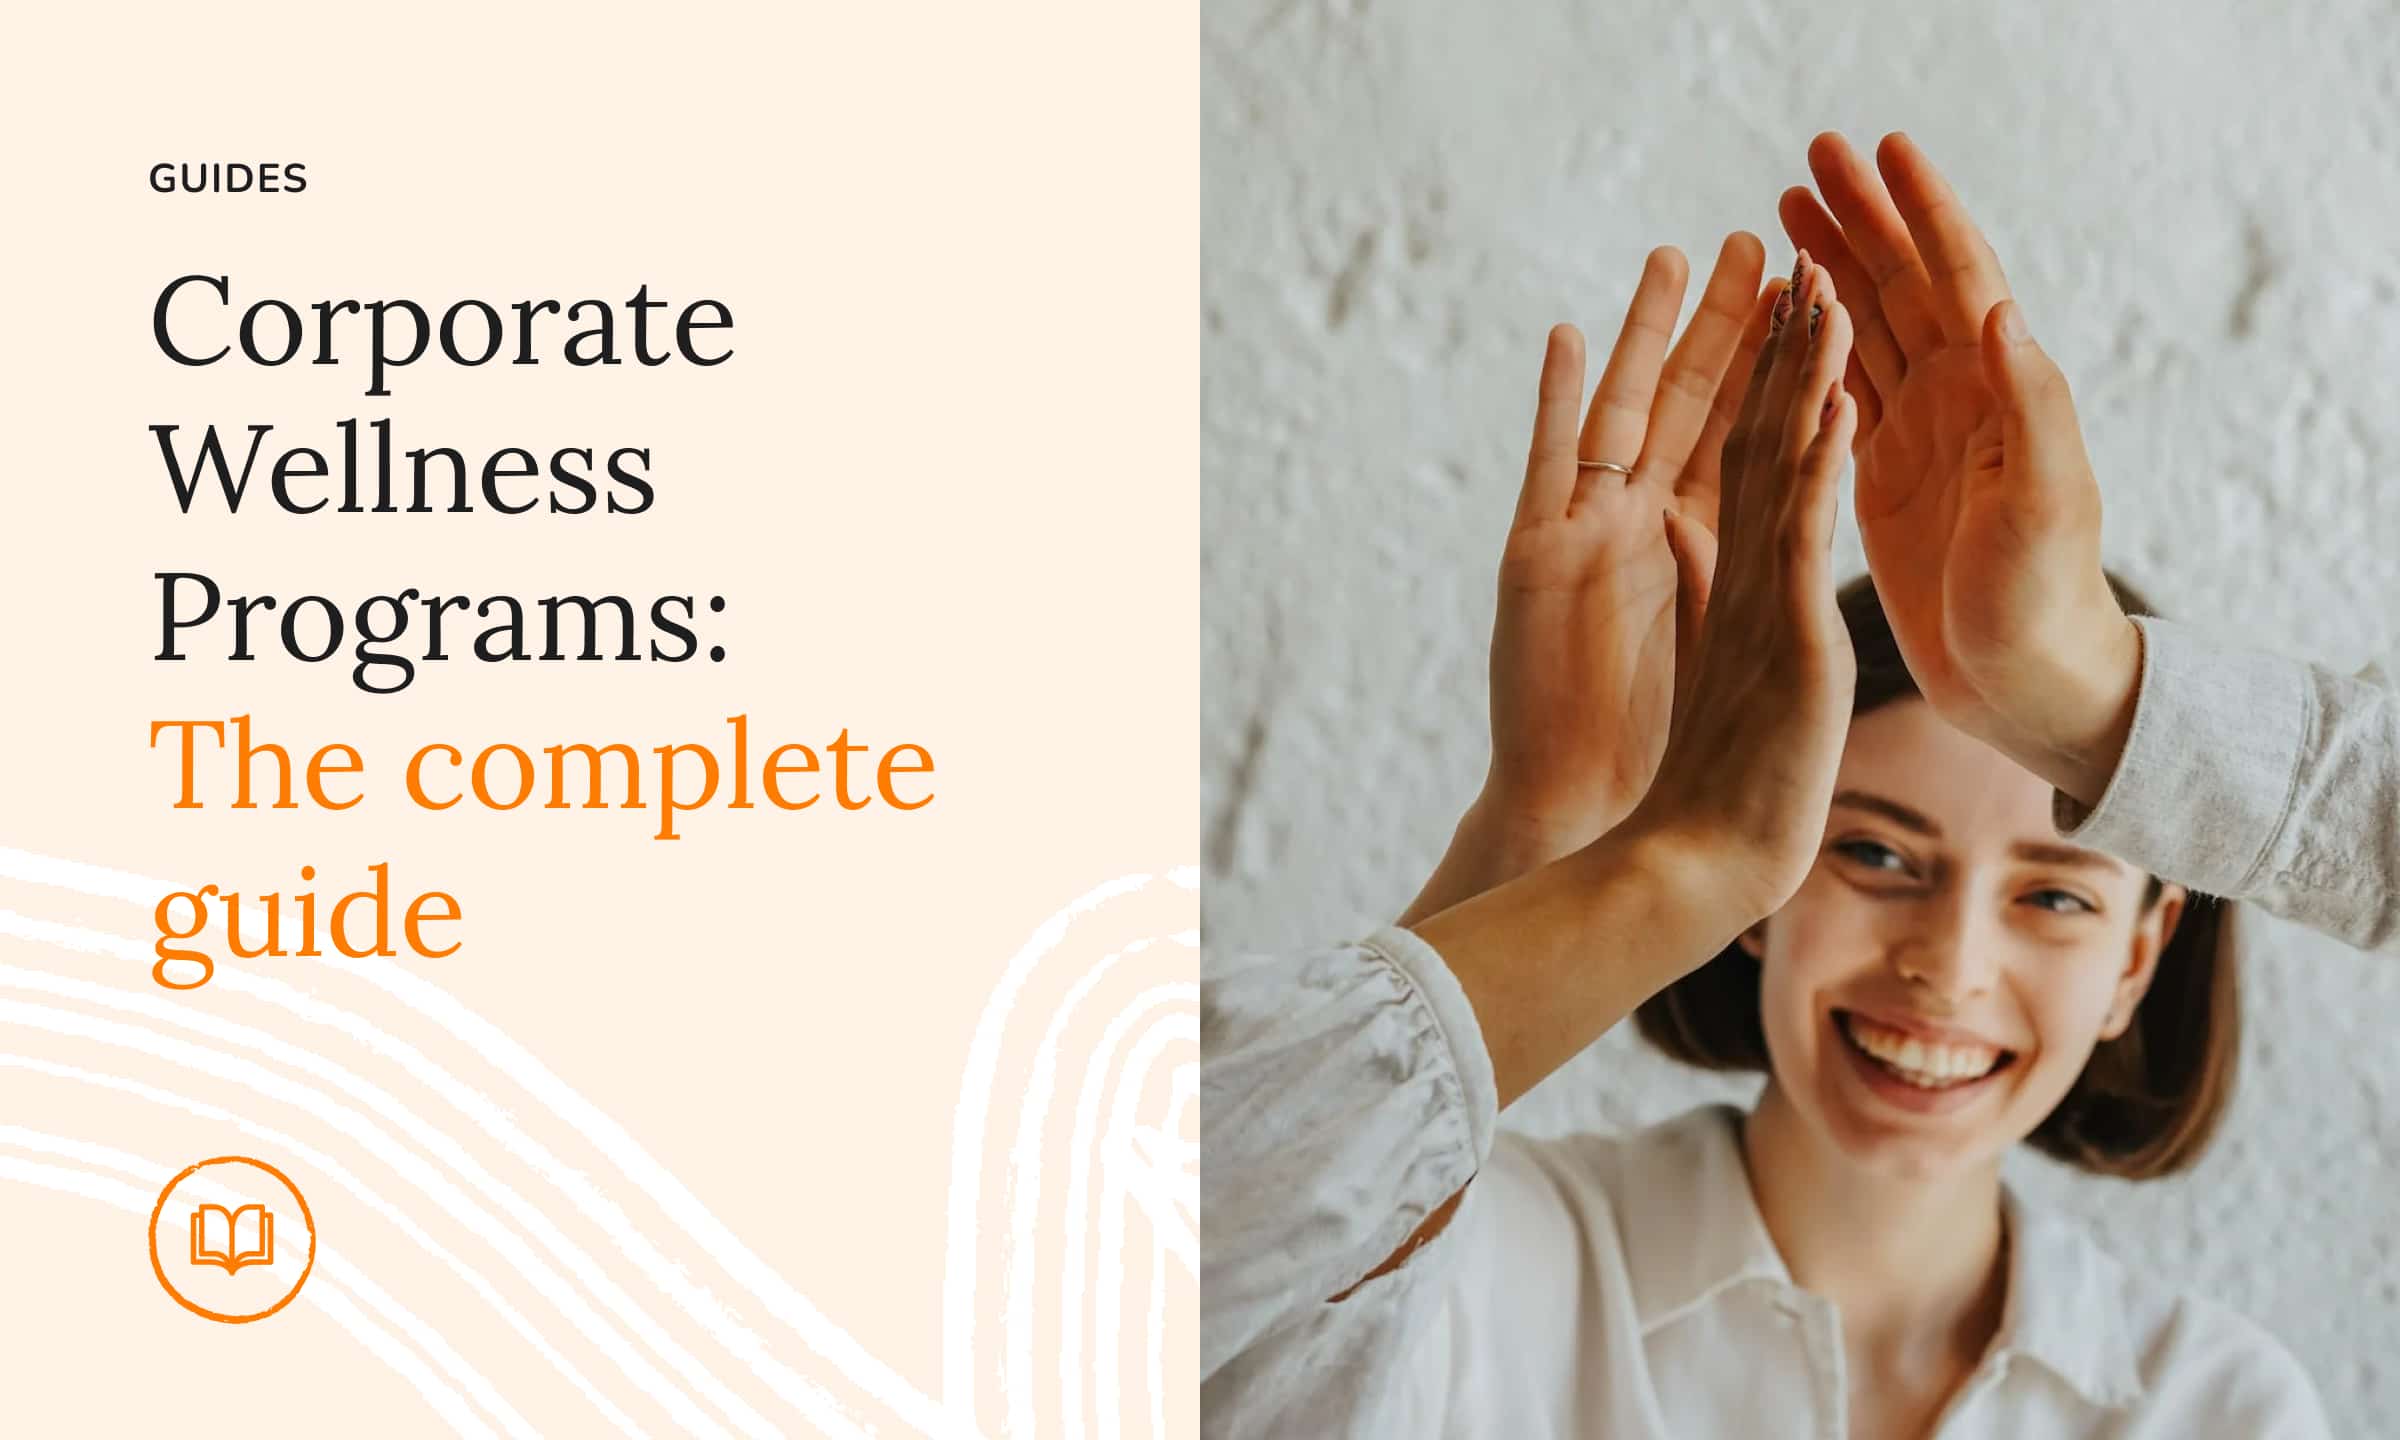 Corporate Wellness Programs: The complete guide